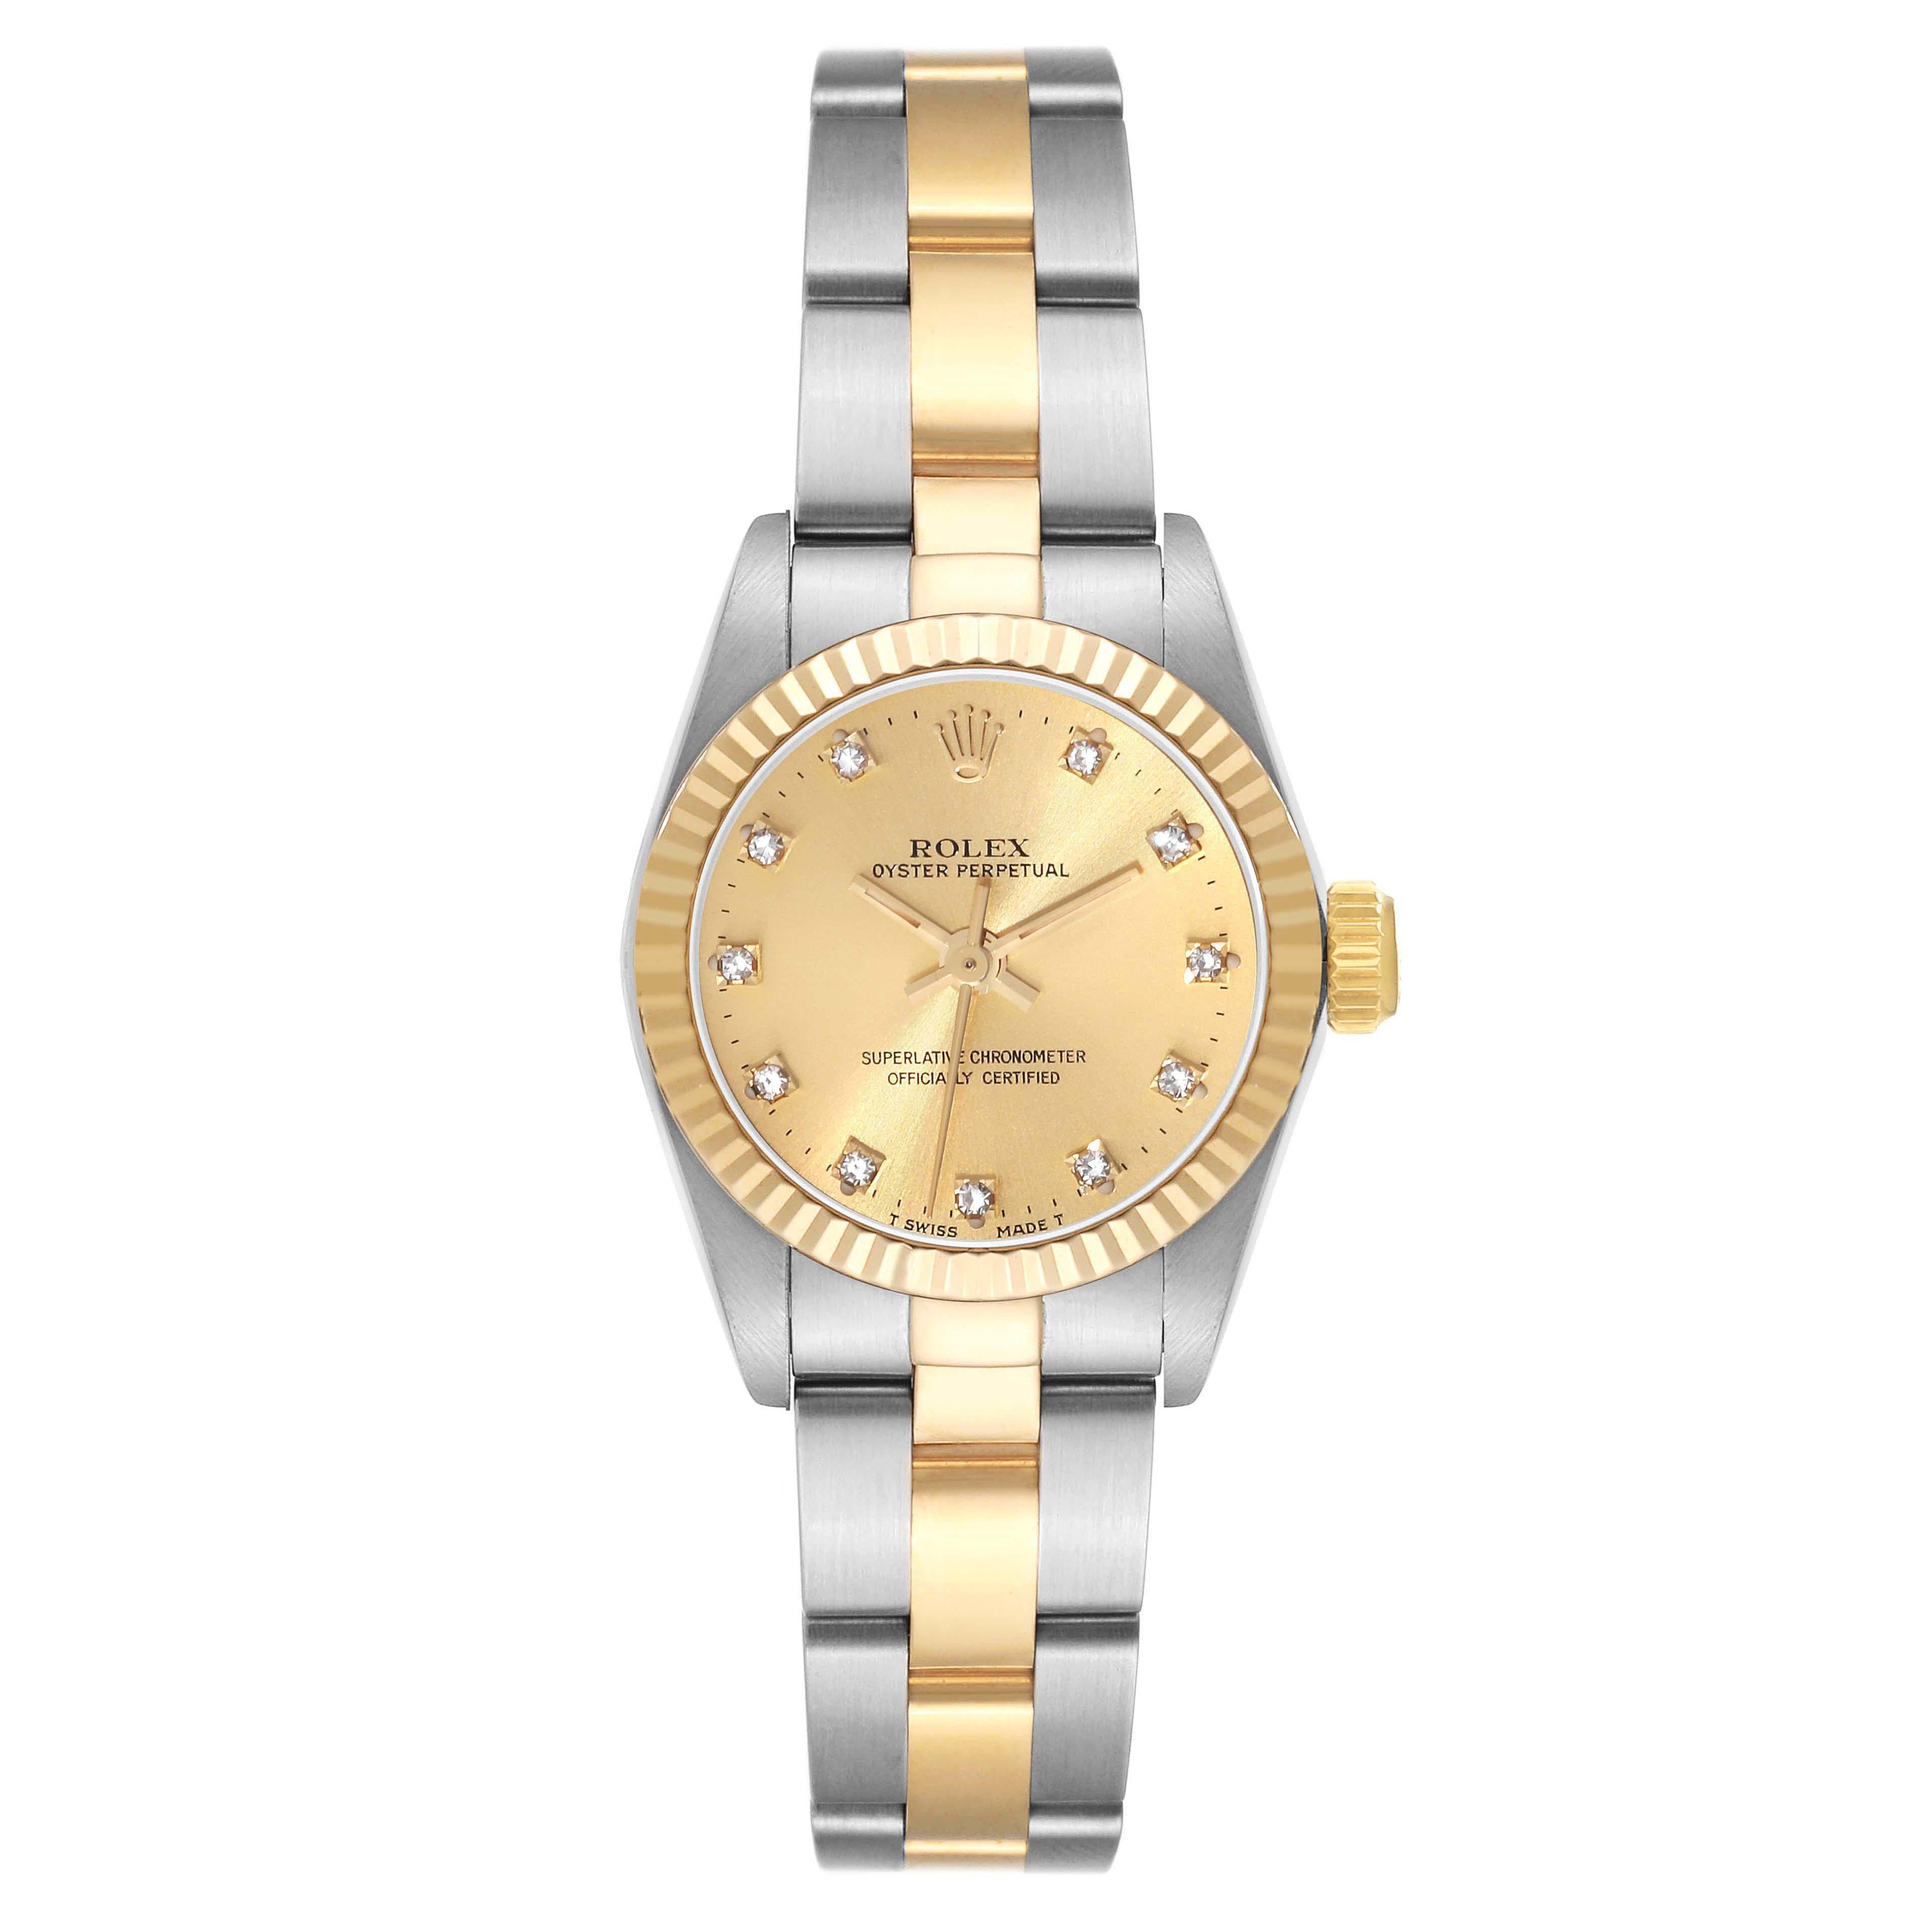 Rolex Oyster Perpetual Steel Yellow Gold Diamond Dial Ladies Watch 67193. Officially certified chronometer automatic self-winding movement. Stainless steel oyster case 24.0 mm in diameter. Rolex logo on an 18k yellow gold crown. 18k yellow gold